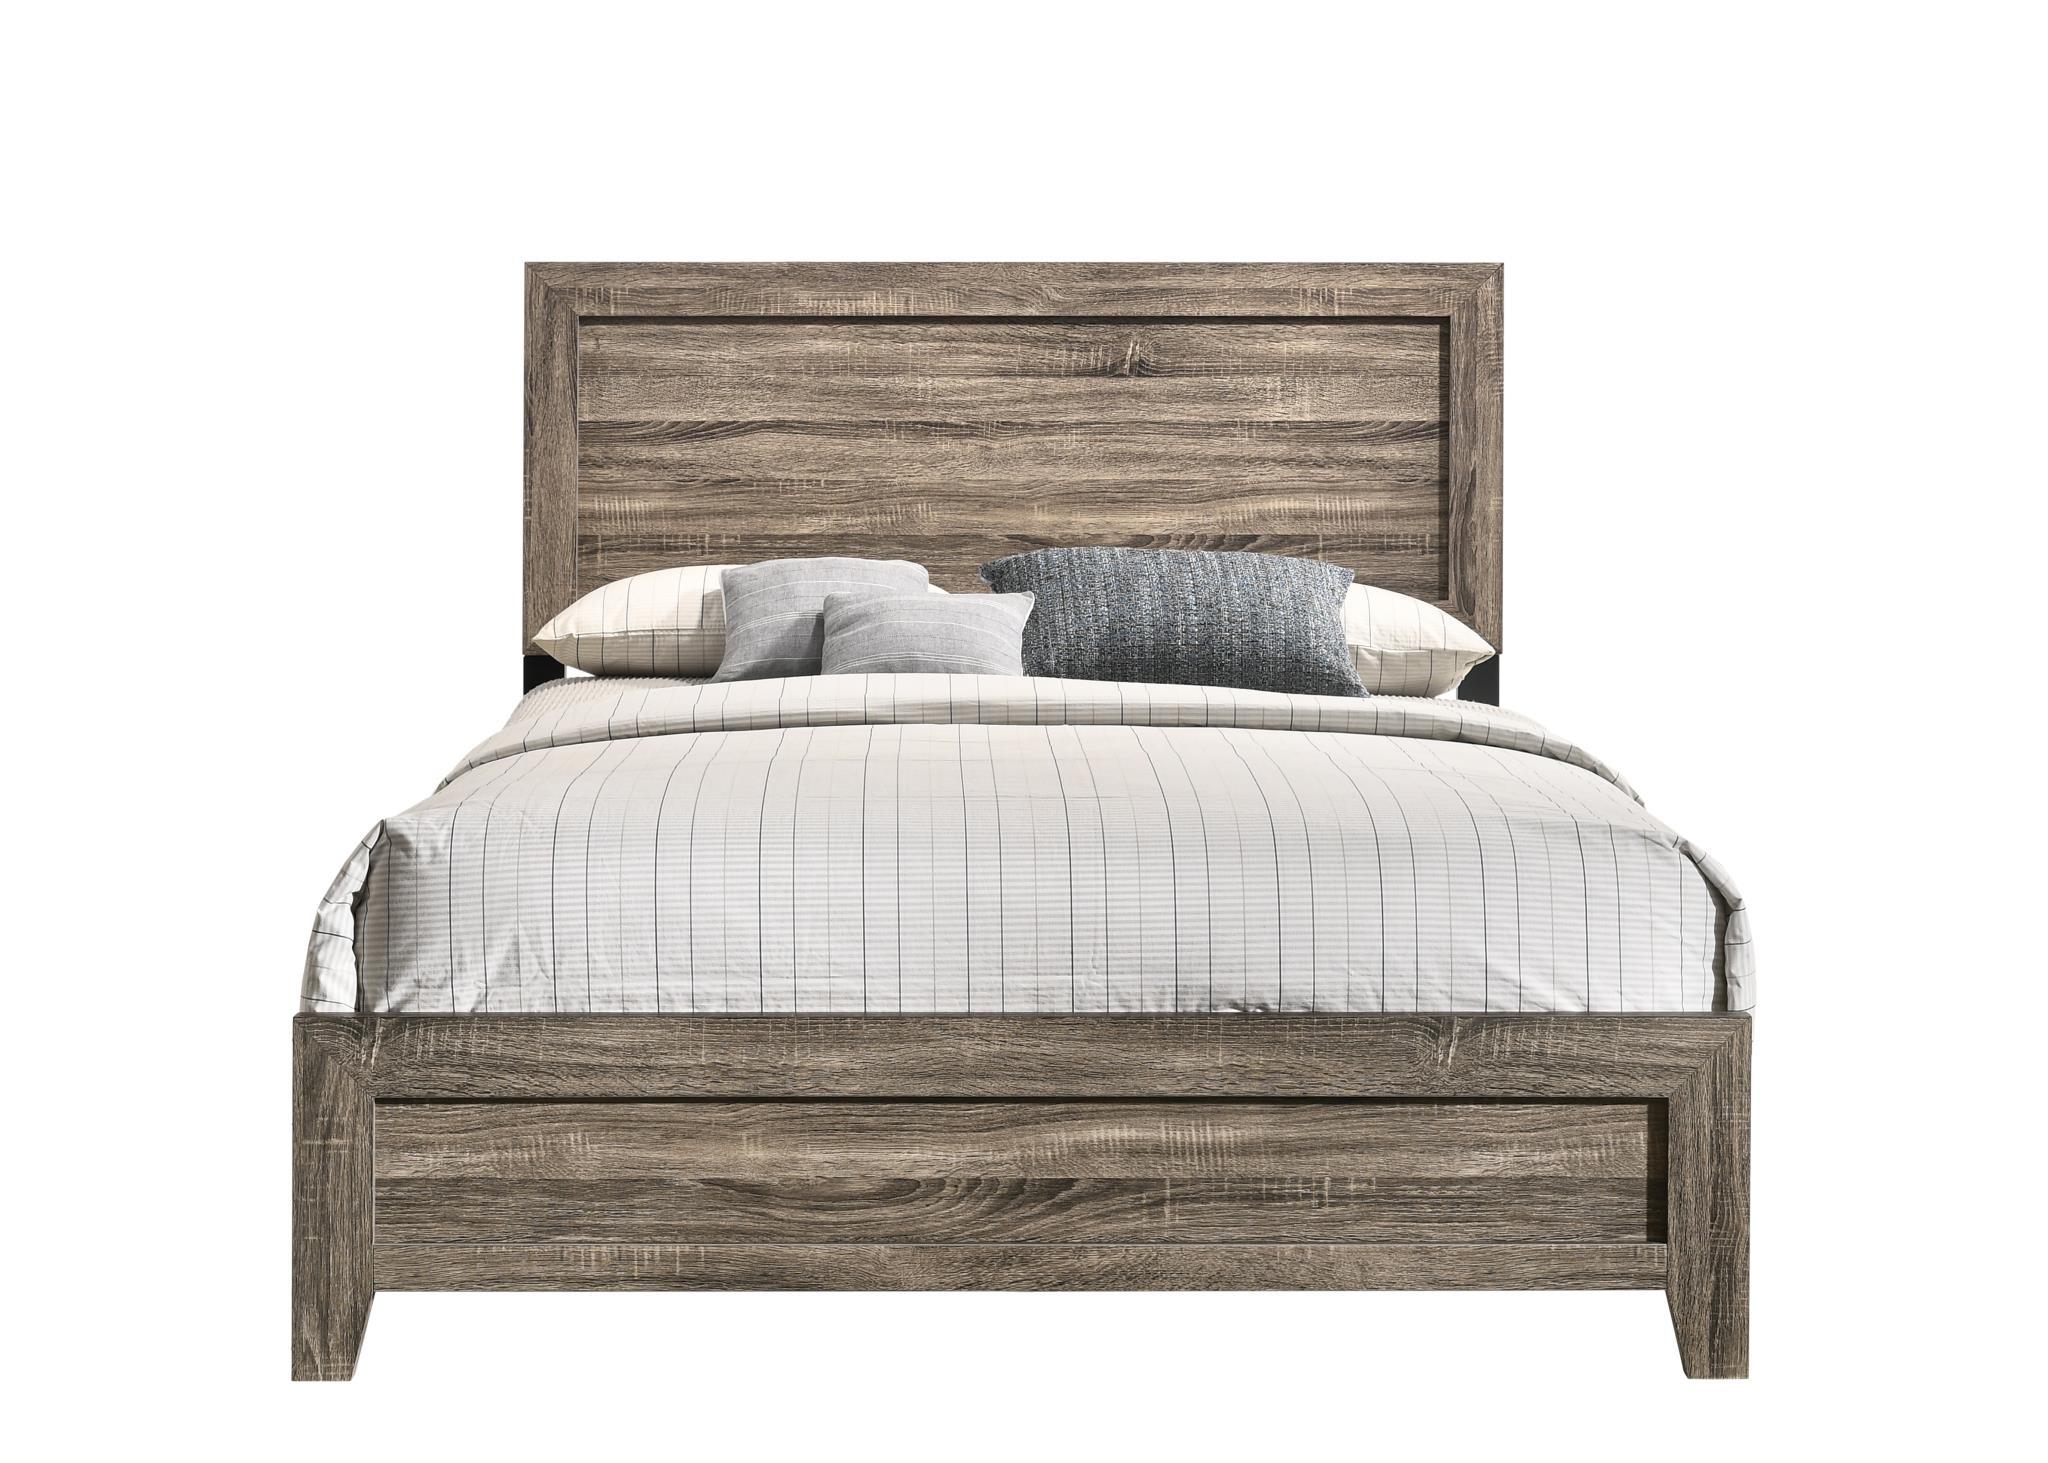 Modern, Transitional Beds LOUIS 1374-104 1374-104 in Brown 